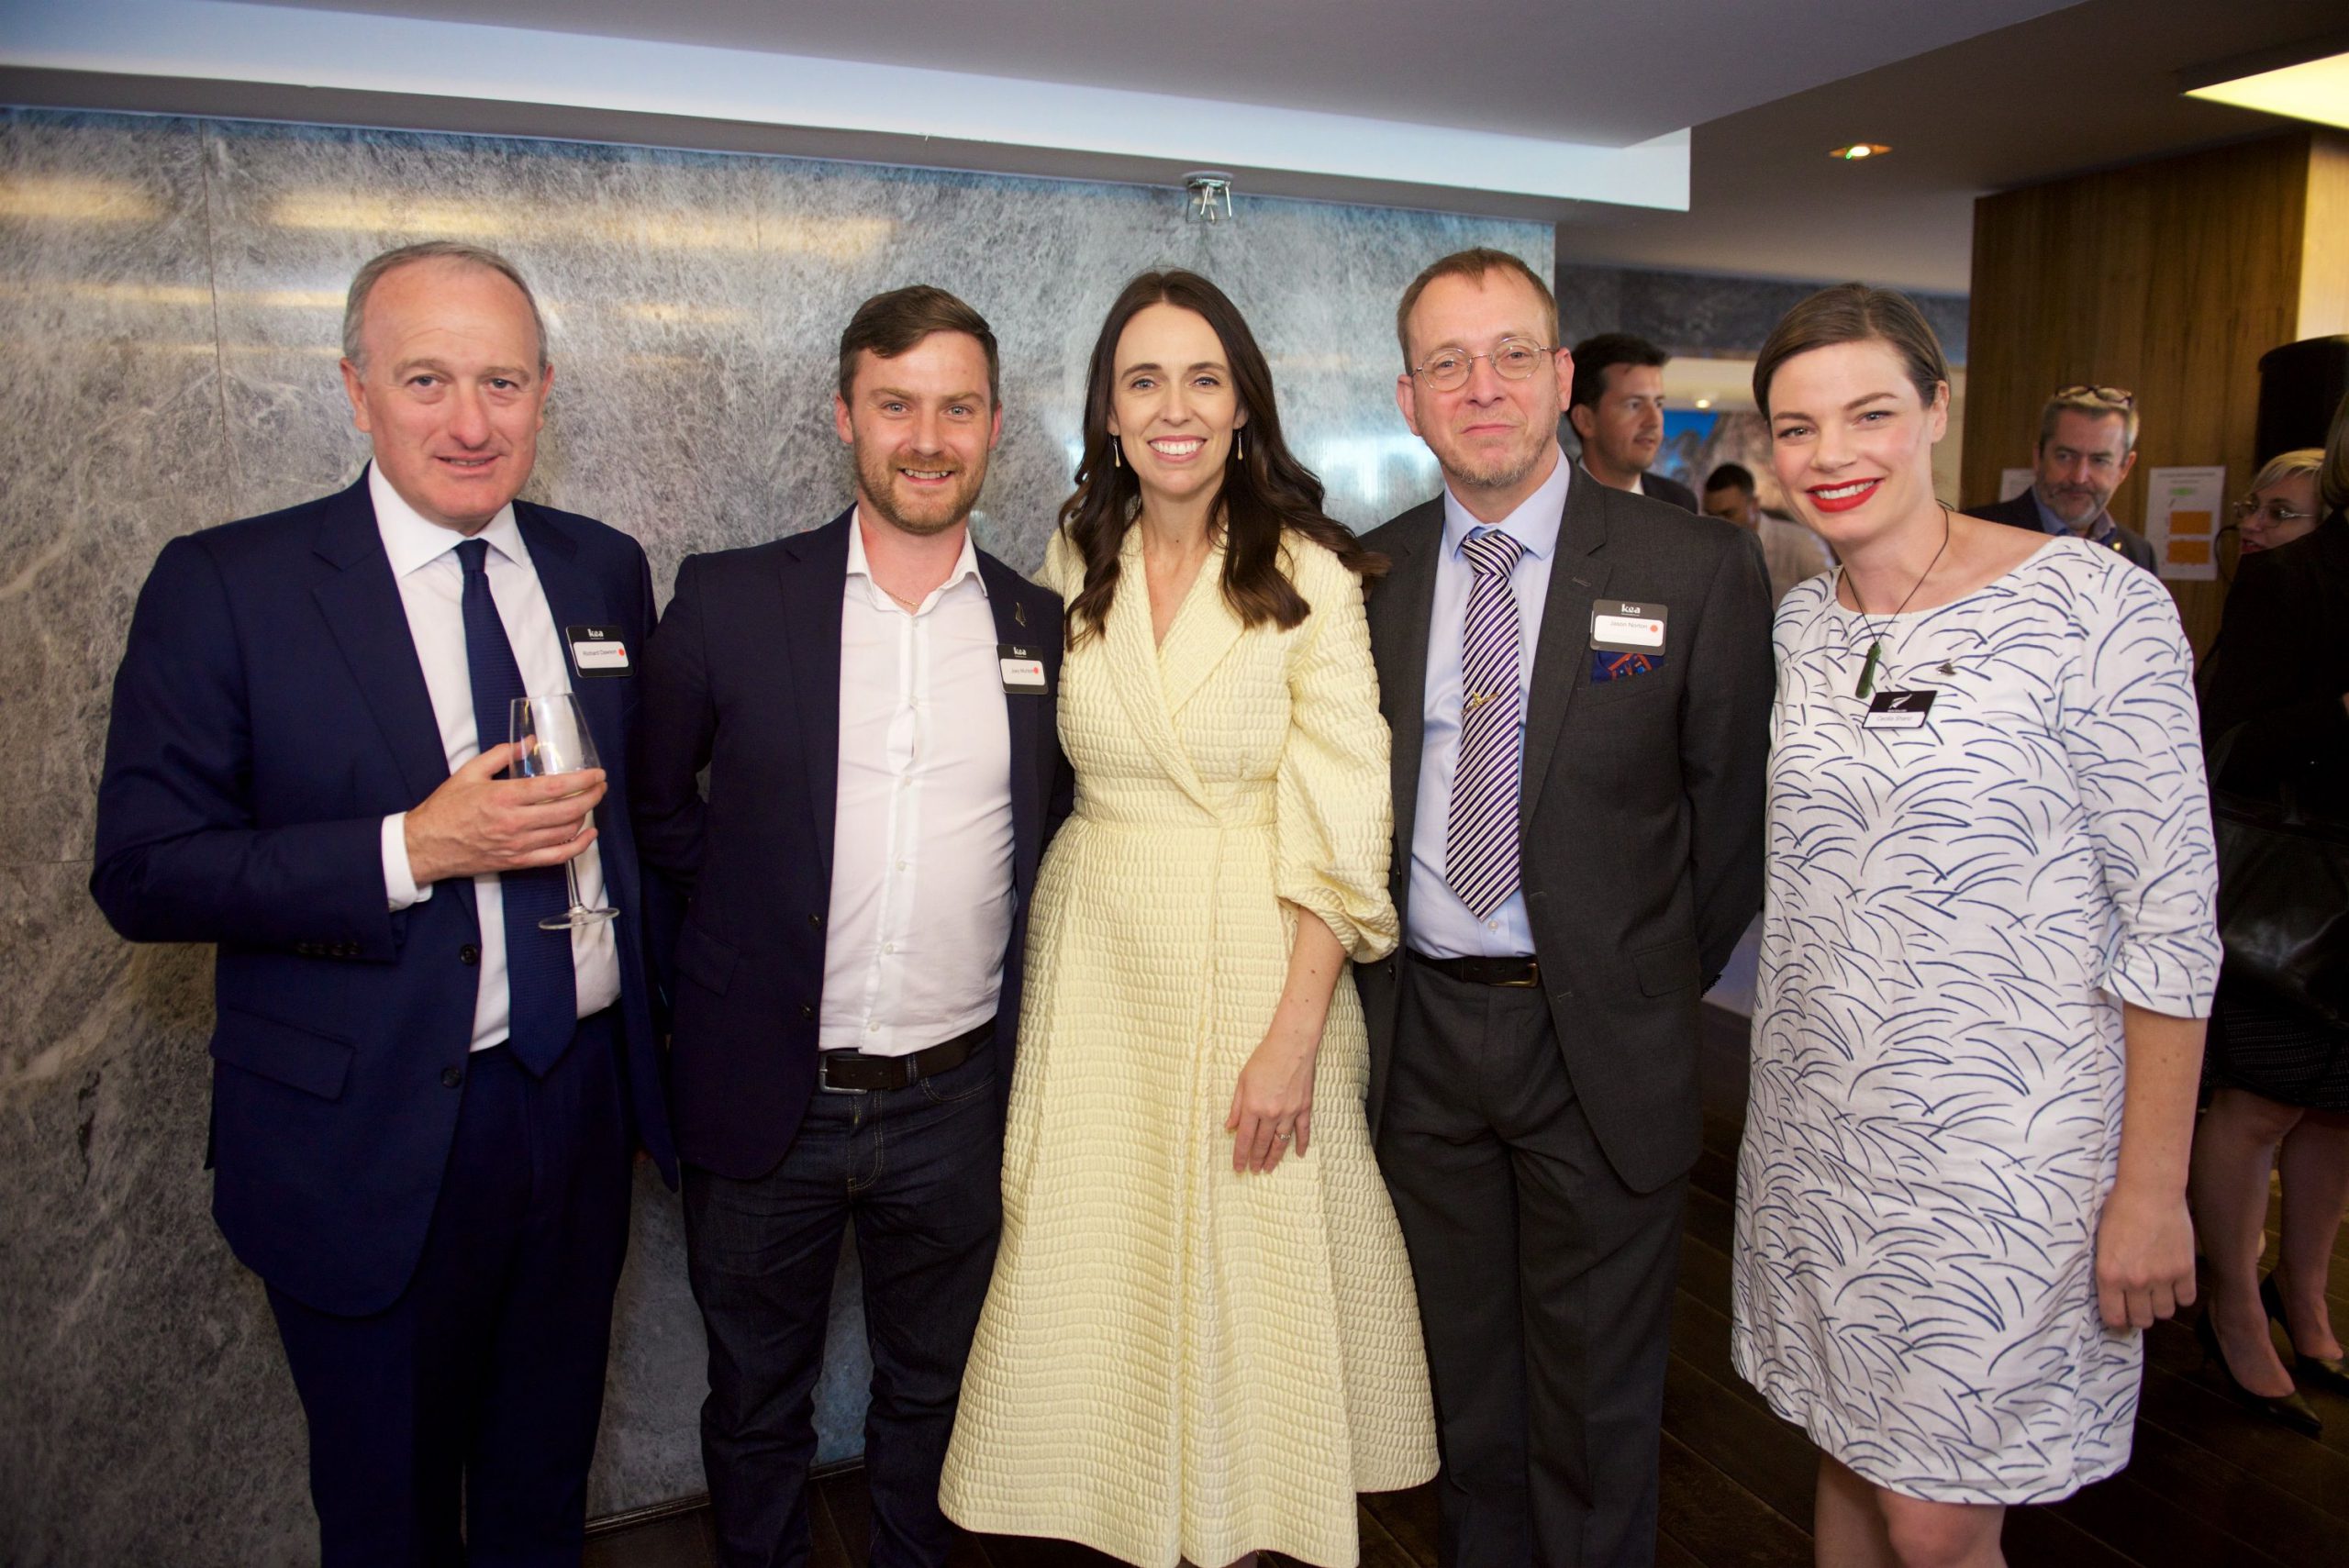 Catalyst IT Europe Managing Director Joey Murison accompanied by UCL's Jason Norton and Rt honourable Jacinda Ardern - Prime Minister of New Zealand